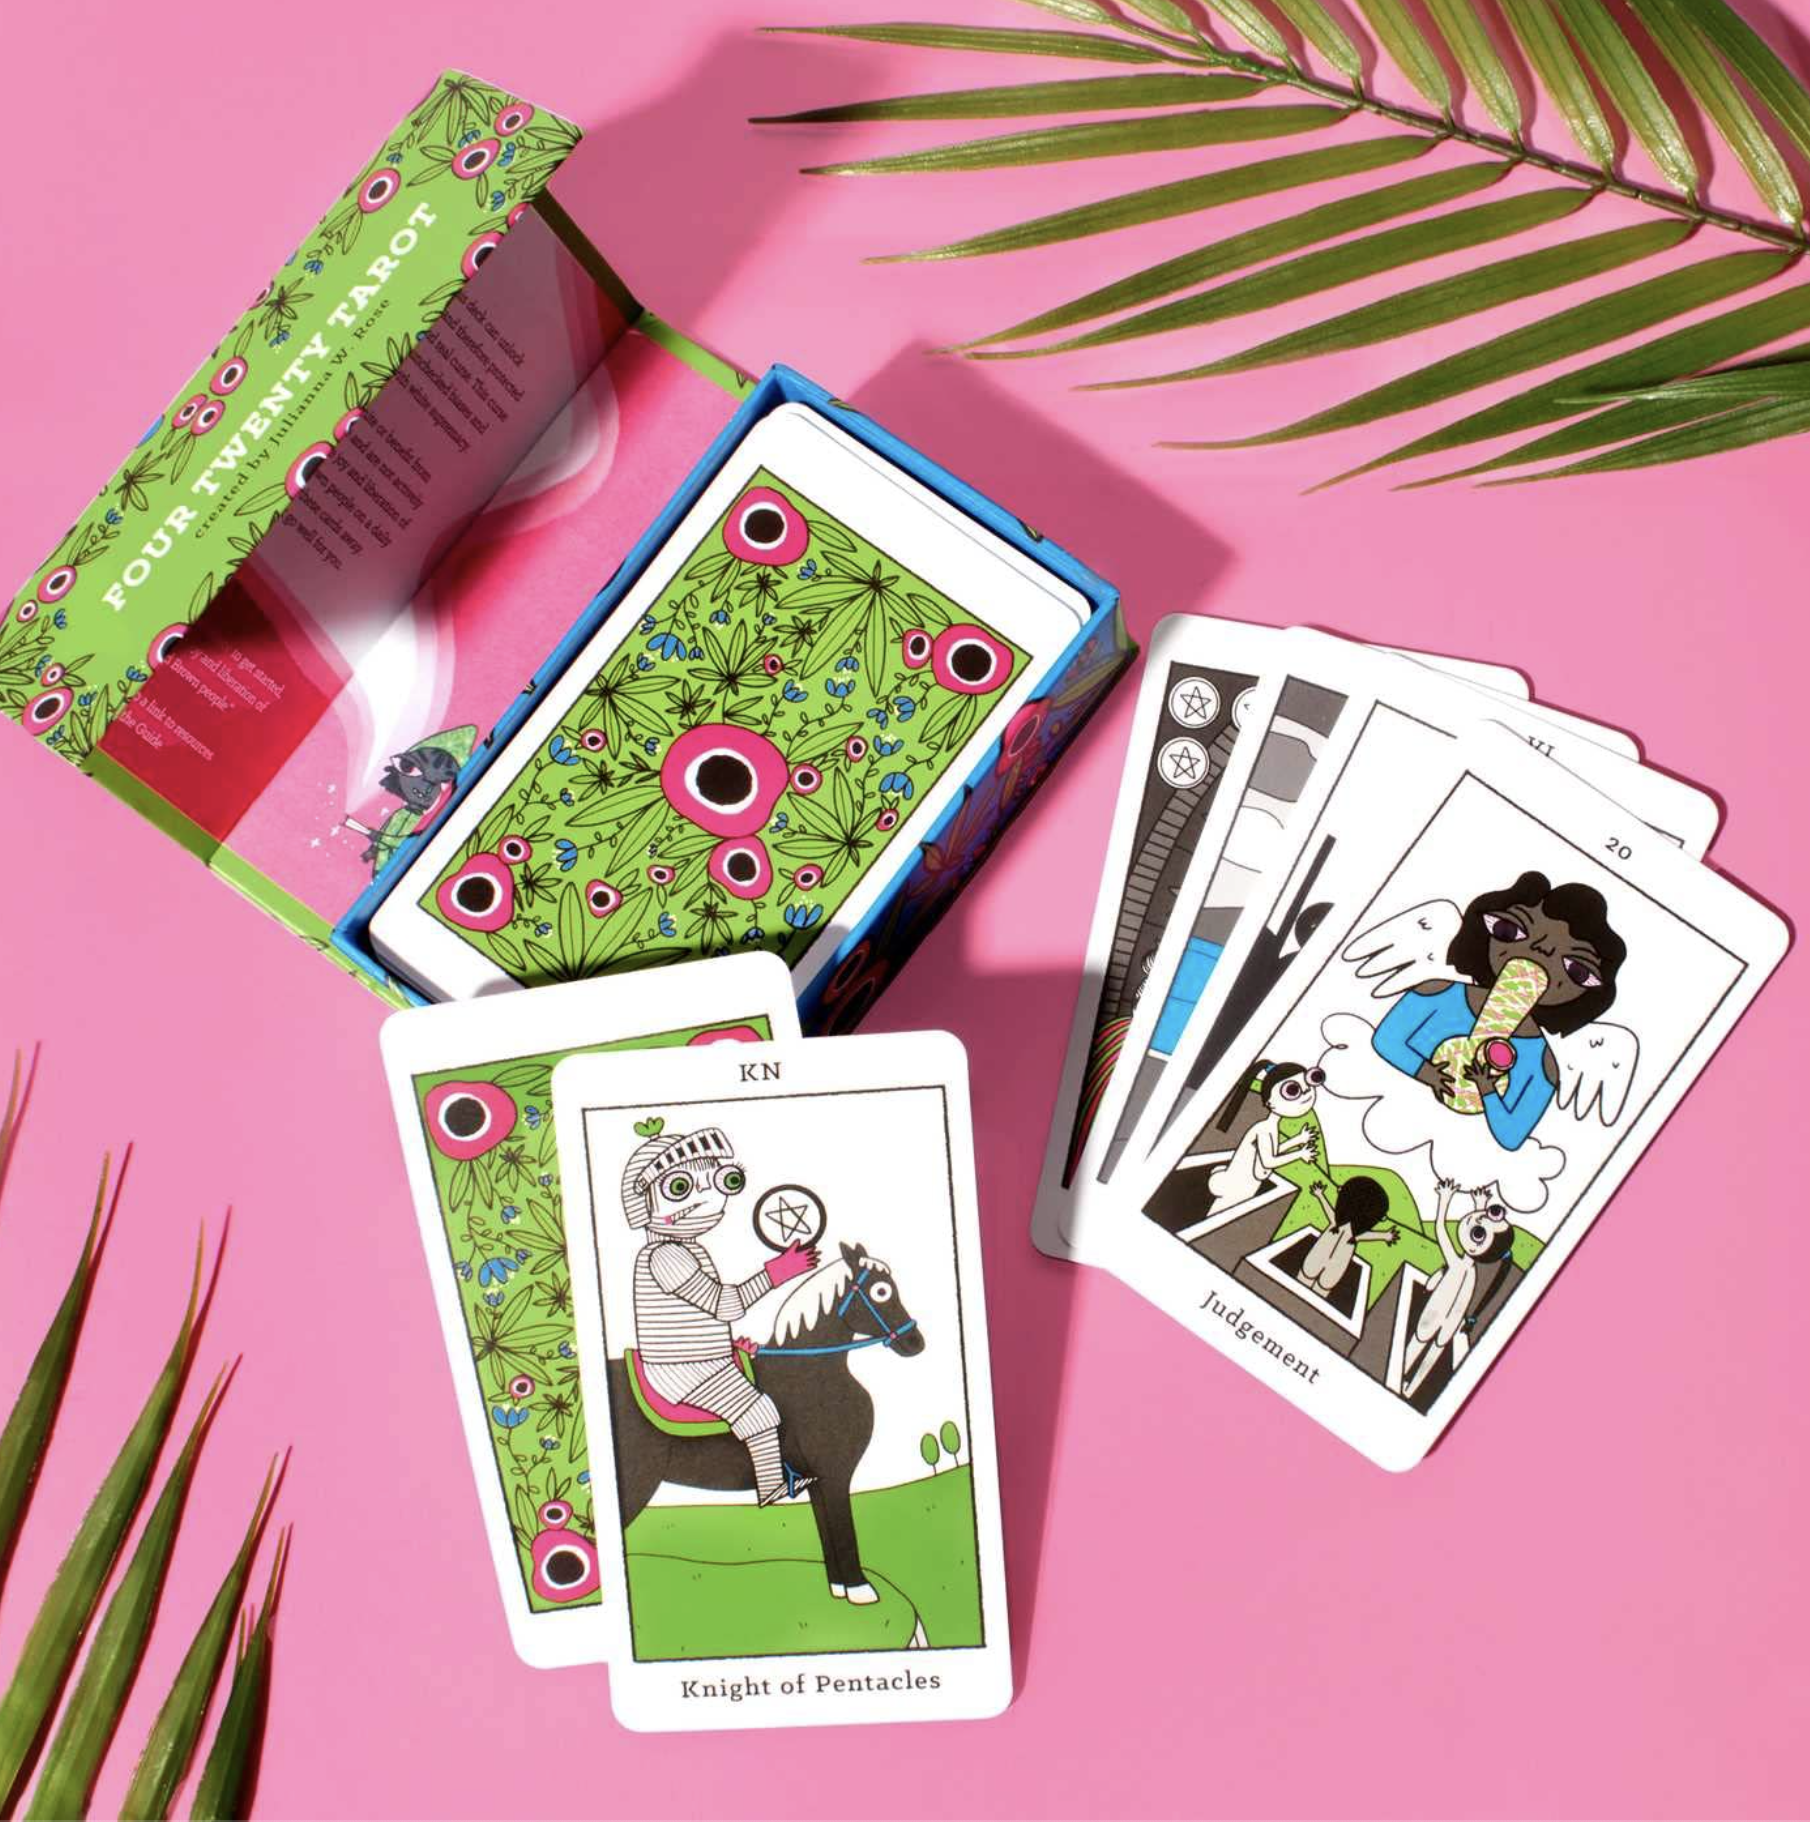 Tarot cards with fun designs on pink background